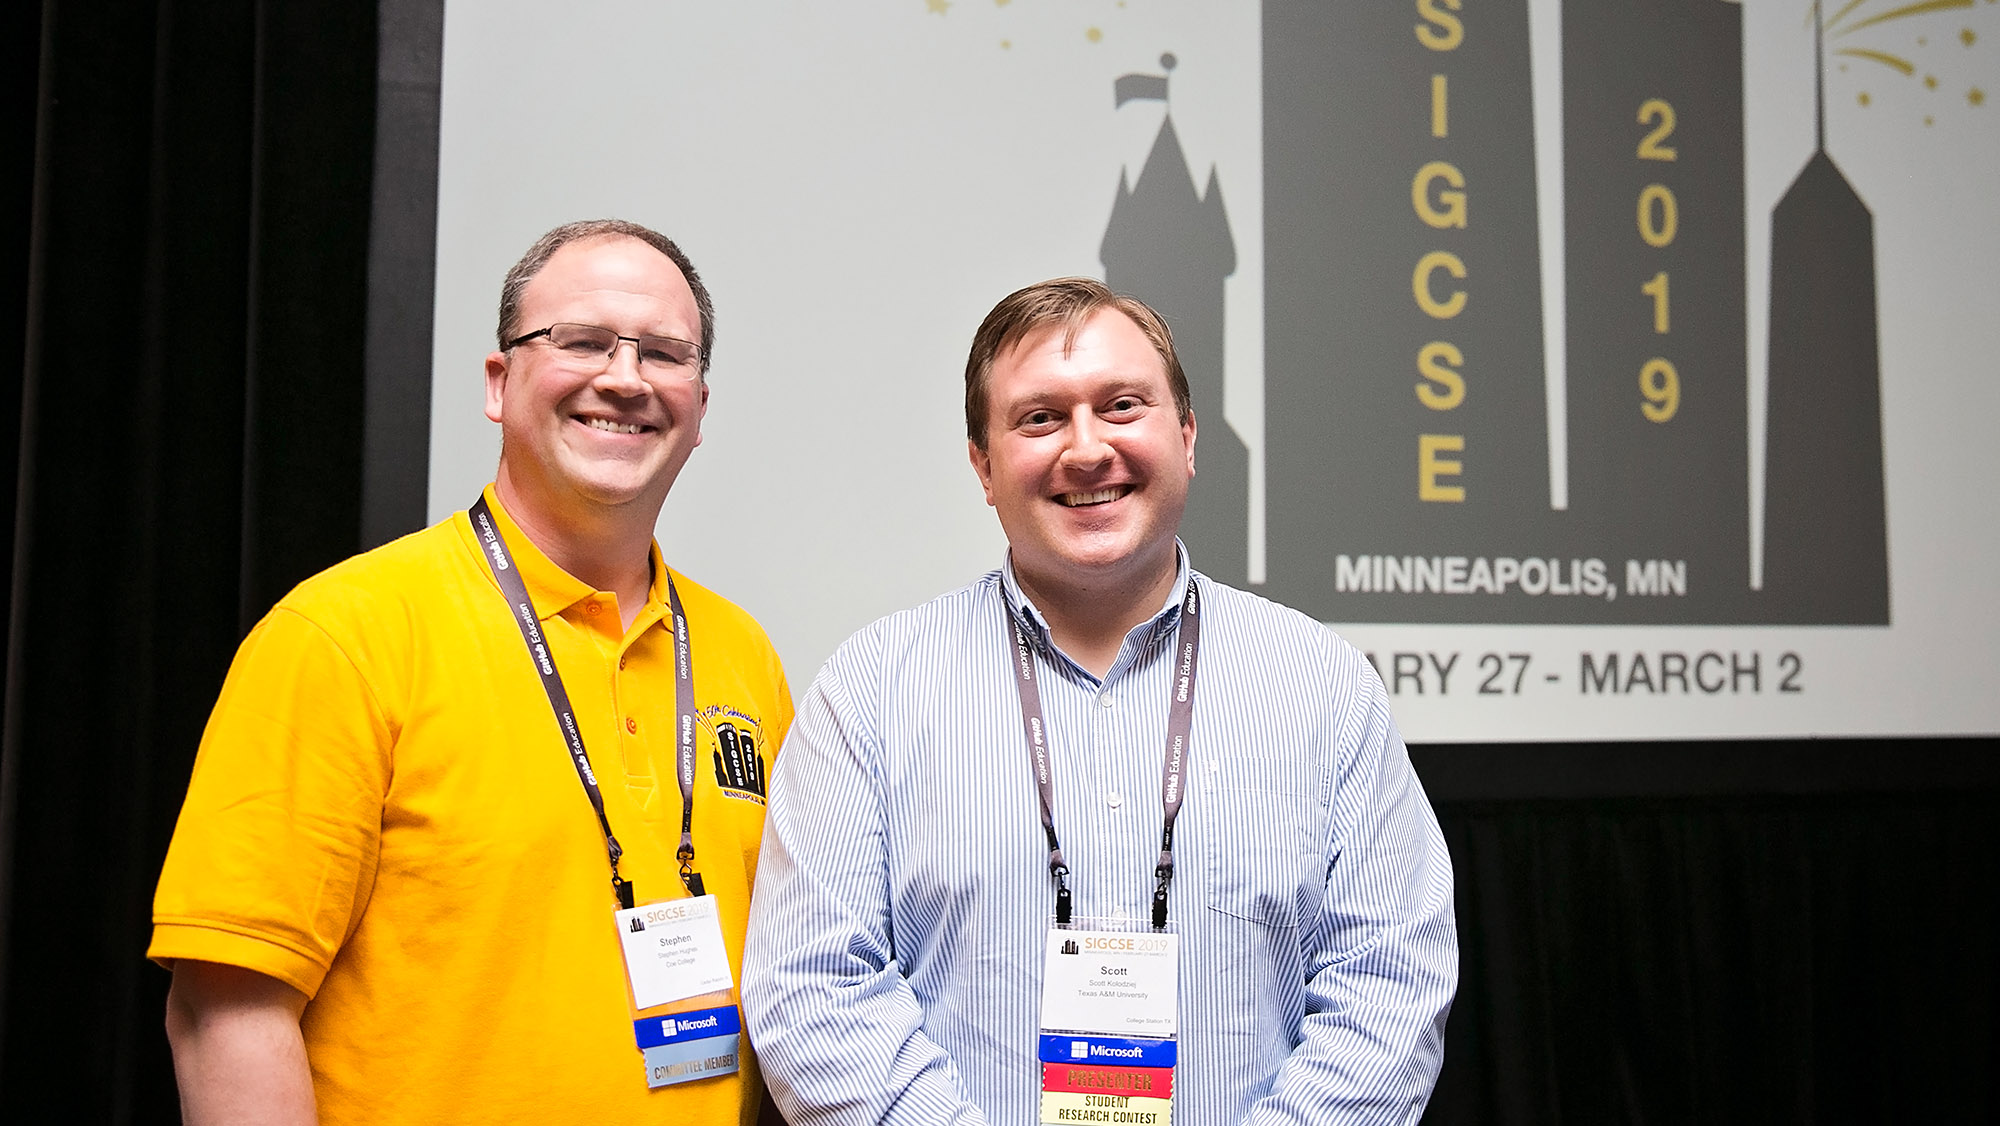 Stephen Hughes and Scott Kolodziej at the SIGCSE 2019 conference.